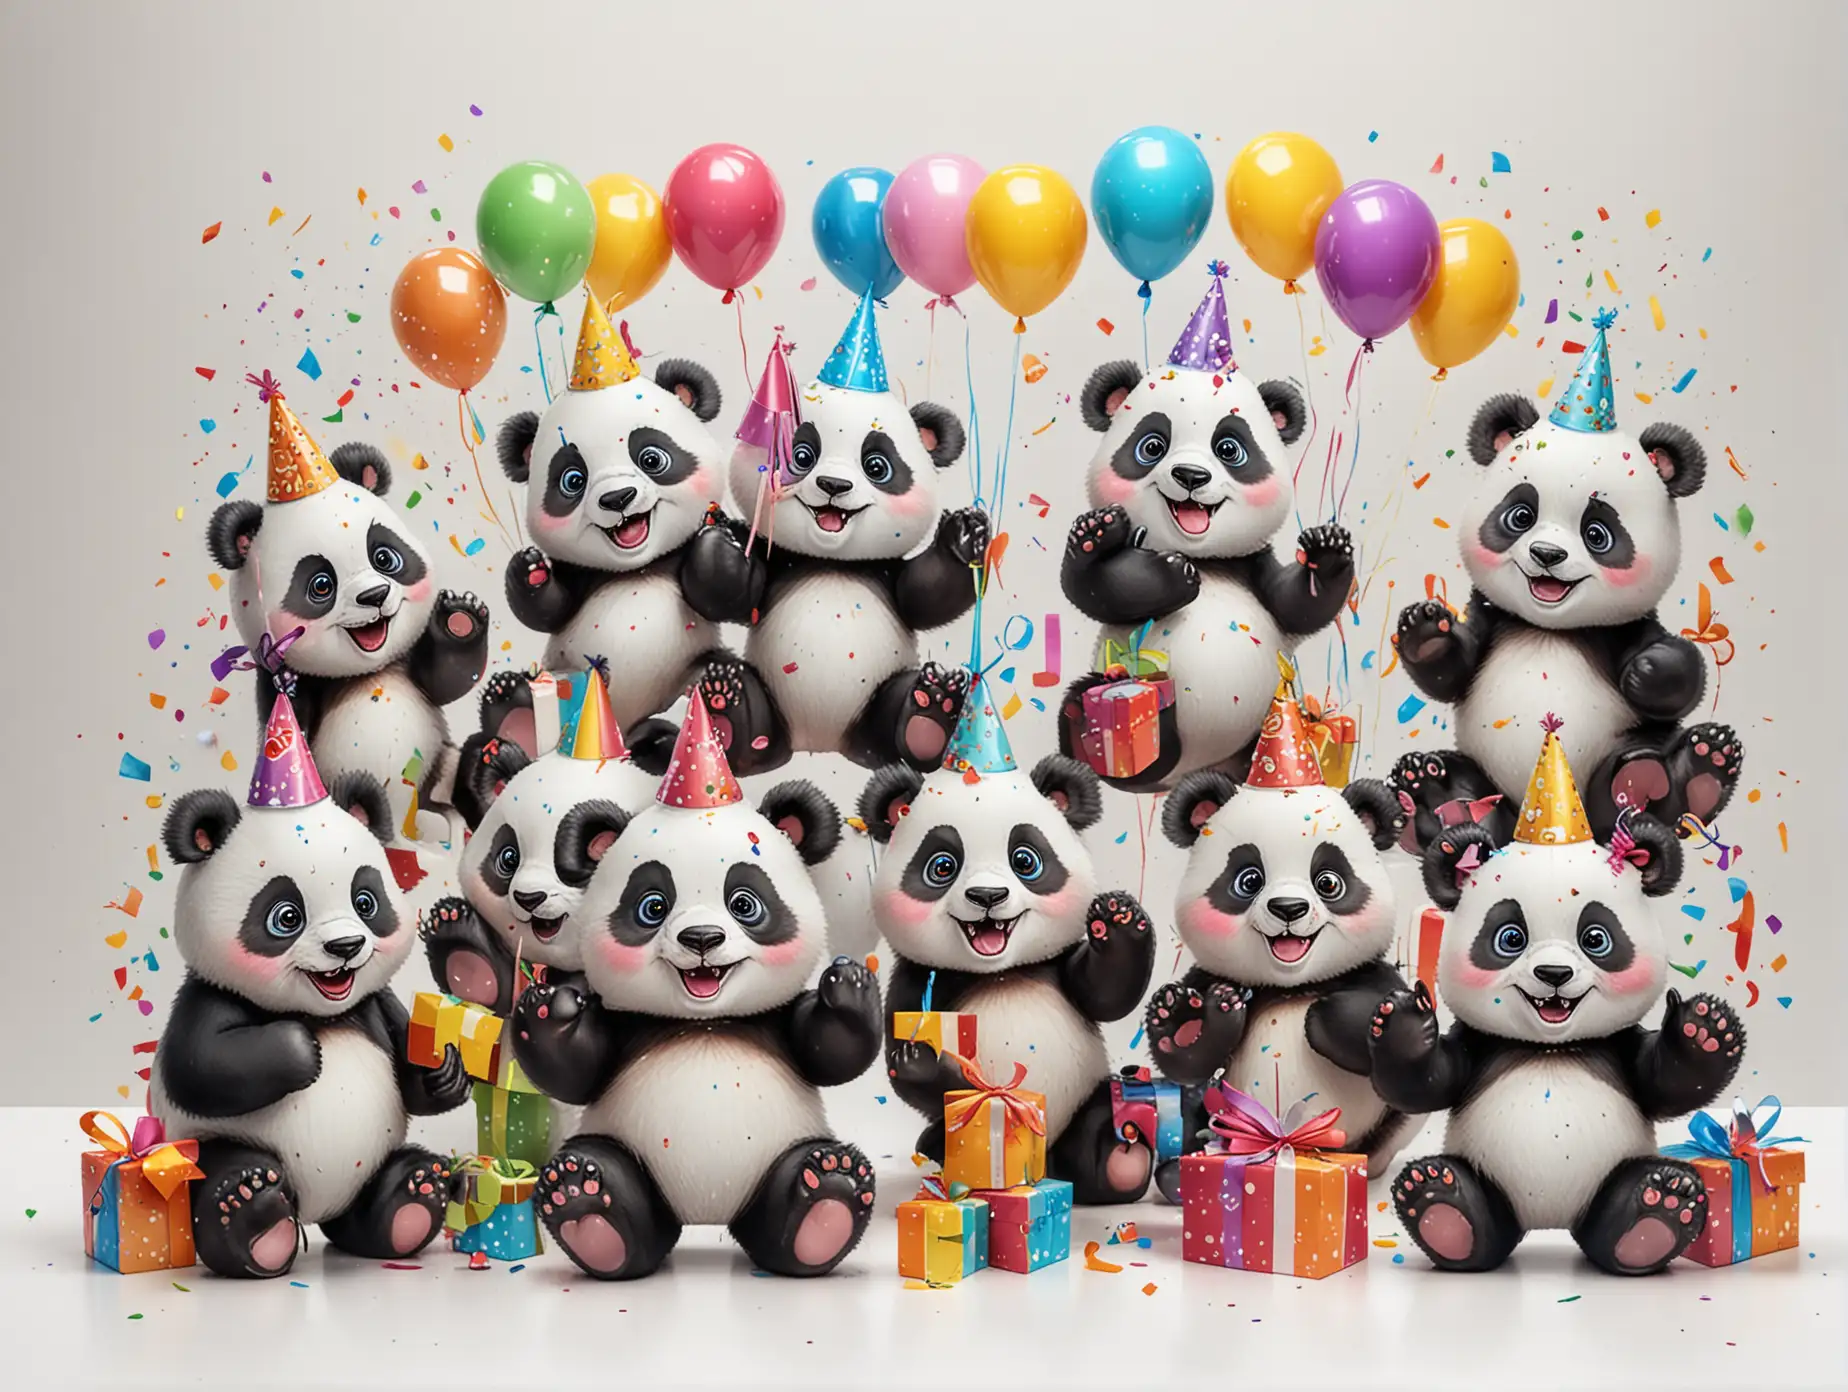 Colorful Cartoon Pandas Celebrating at a Birthday Party on White Background